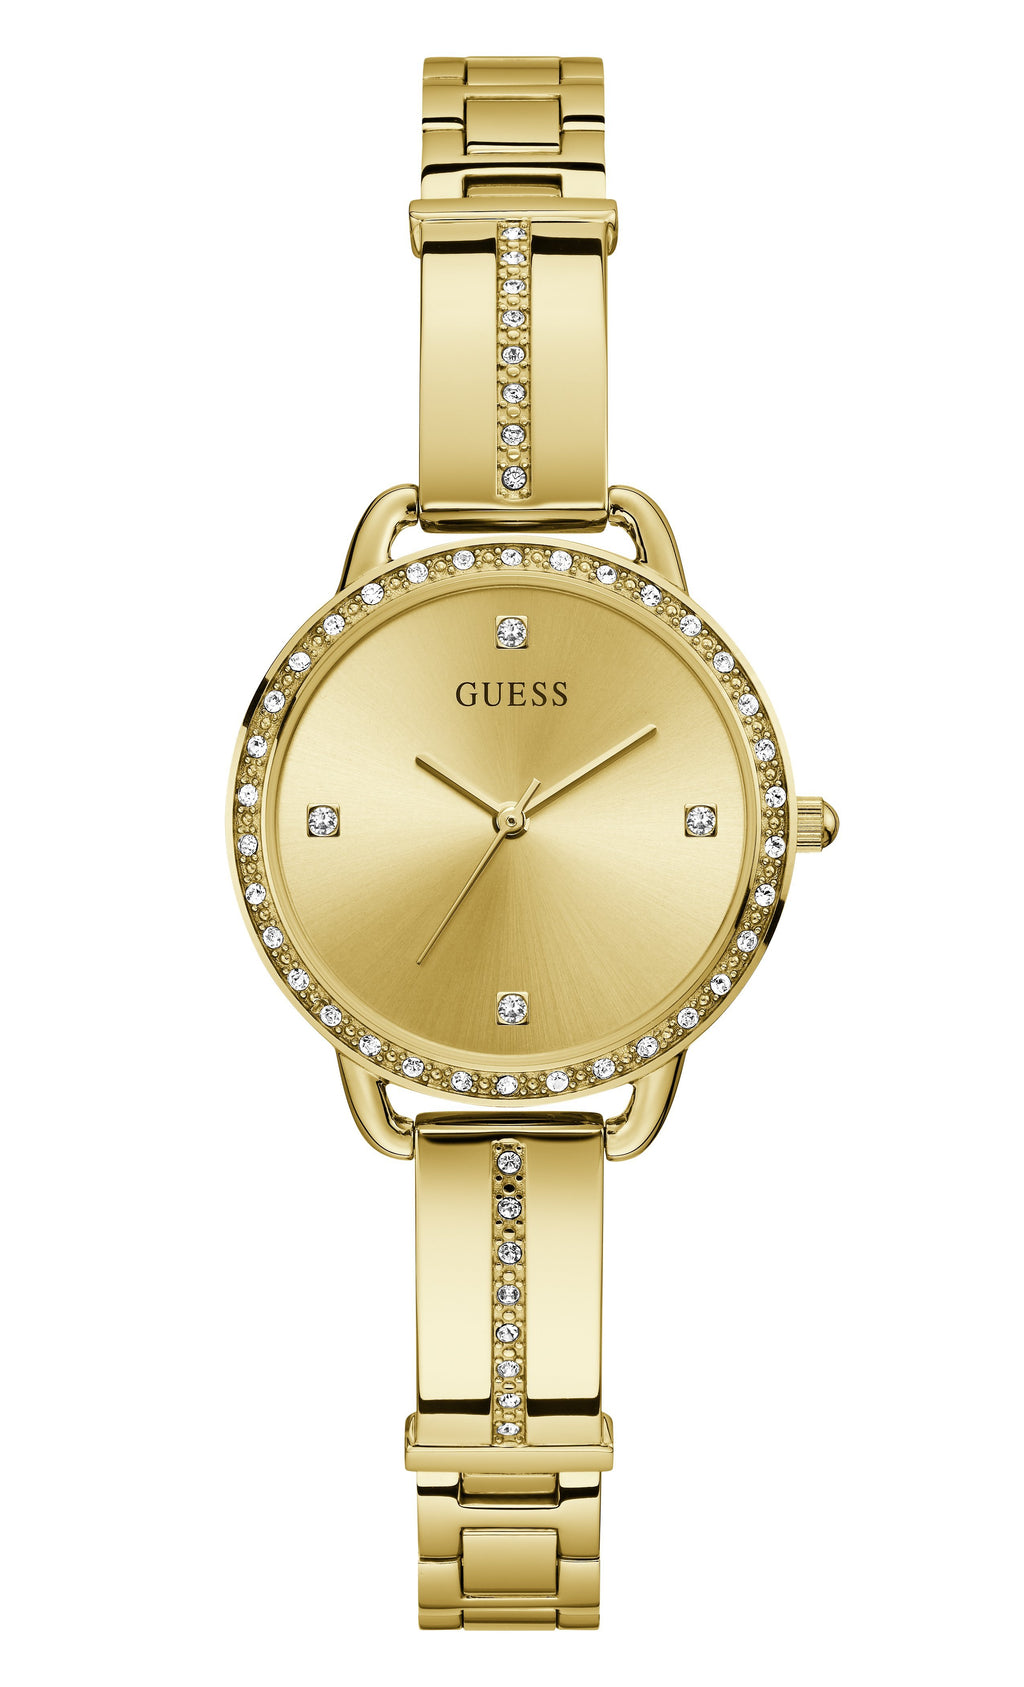 Guess Bellini Gold Tone Stainless Steel Watch GW0022L2 – Bevilles Jewellers